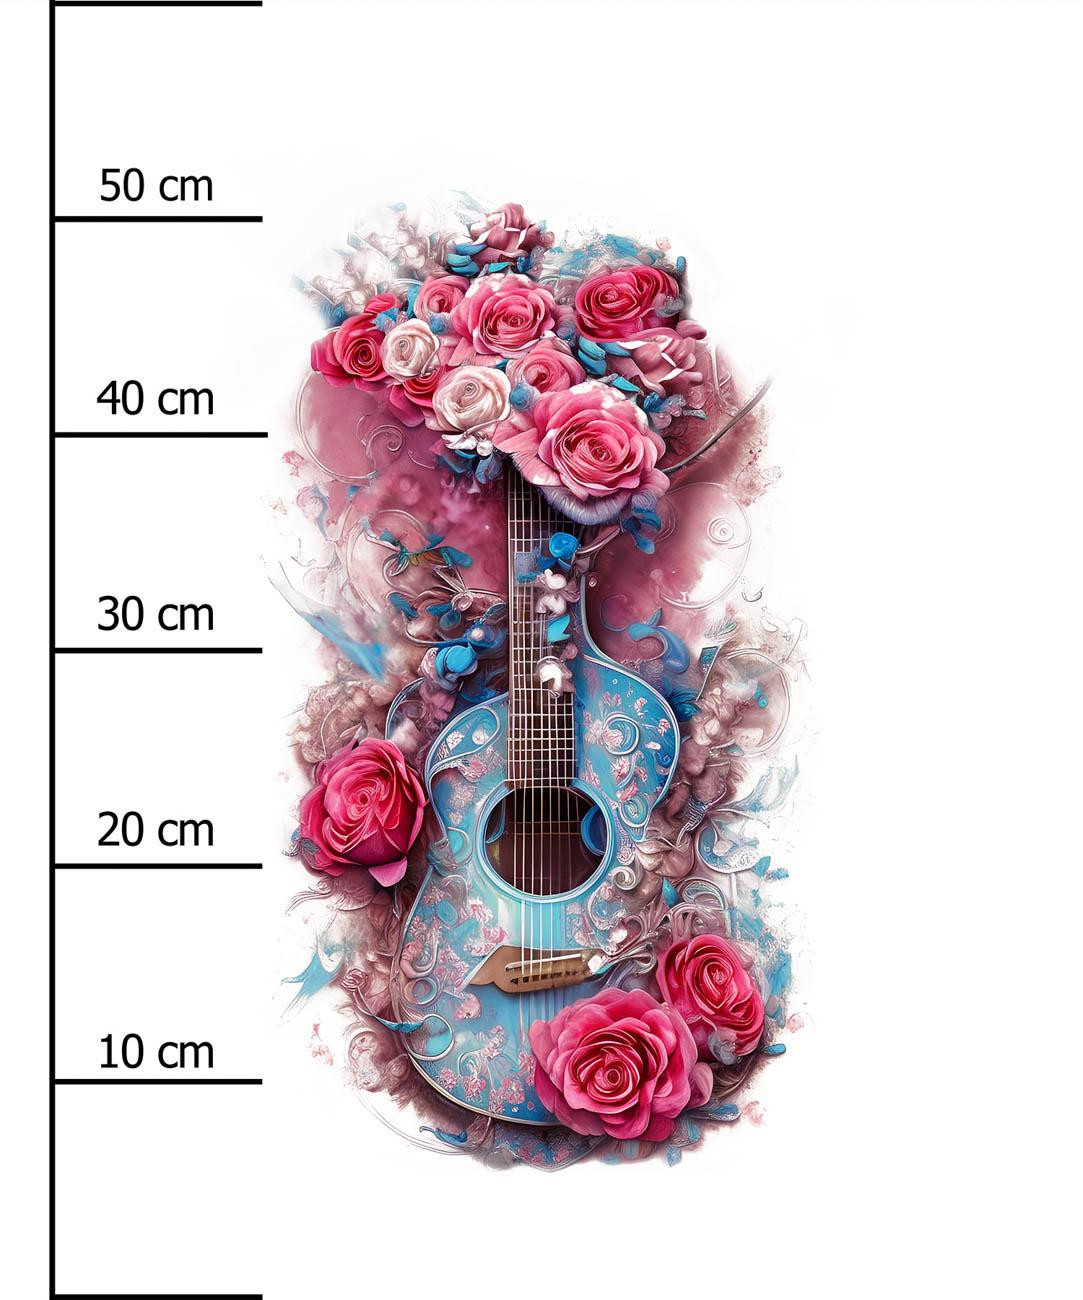 GUITAR WITH ROSES -  PANEL (60cm x 50cm) brushed knitwear with elastane ITY